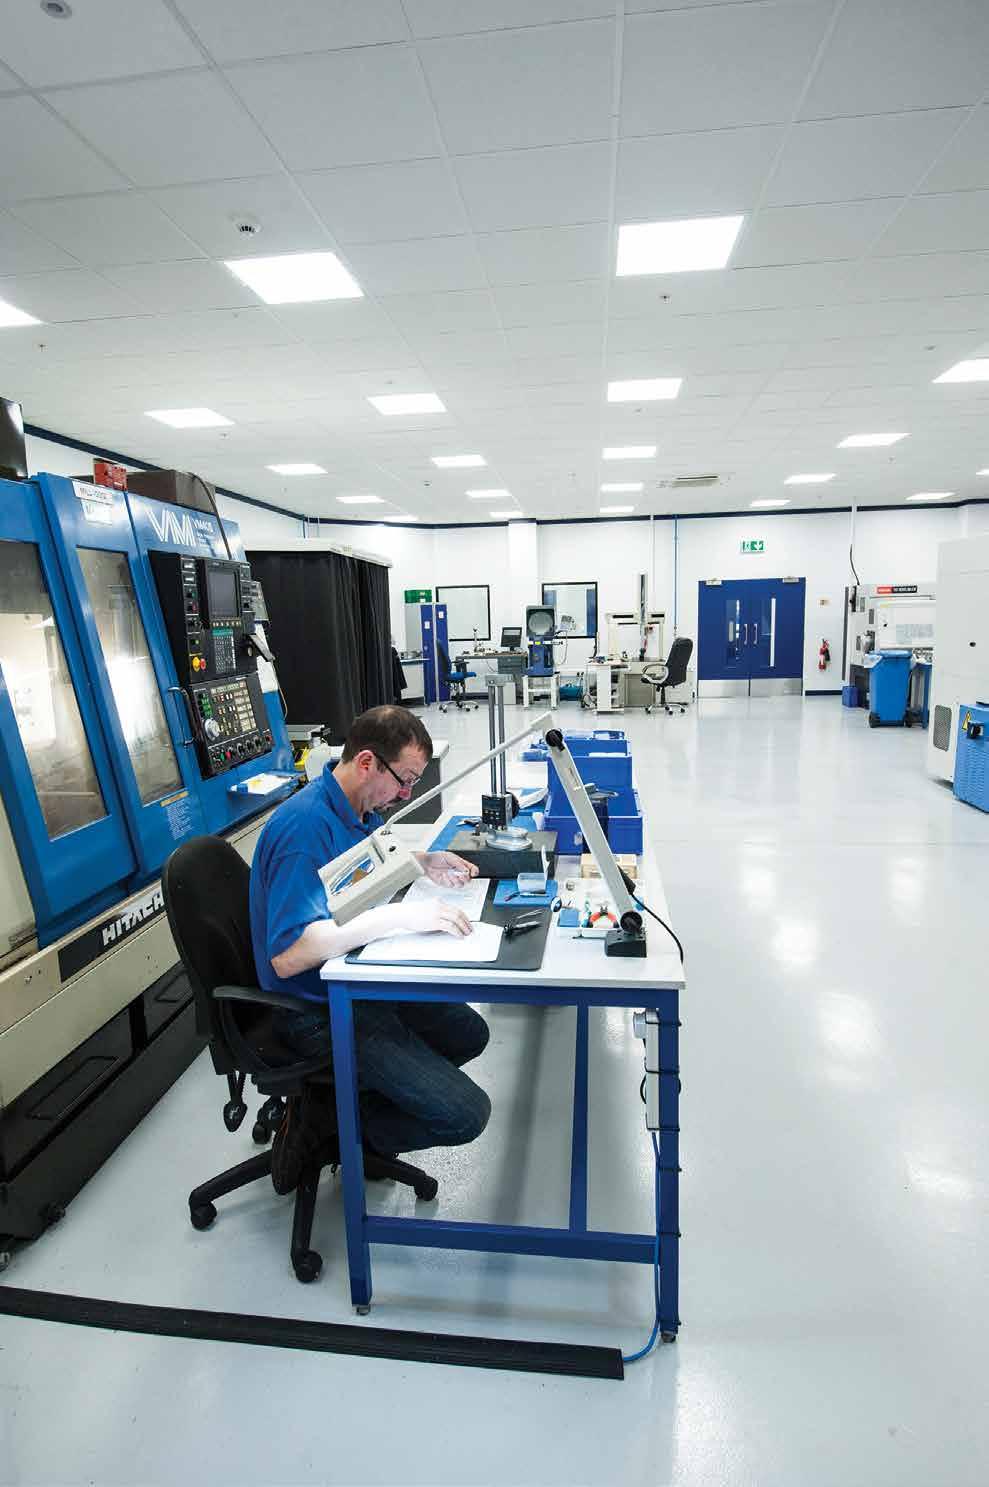 COMPONENT MACHINING Orthoplastics is a World leading UHMWPE machining and manufacturing expert that guides you through compliance, increases speed to market and reduces